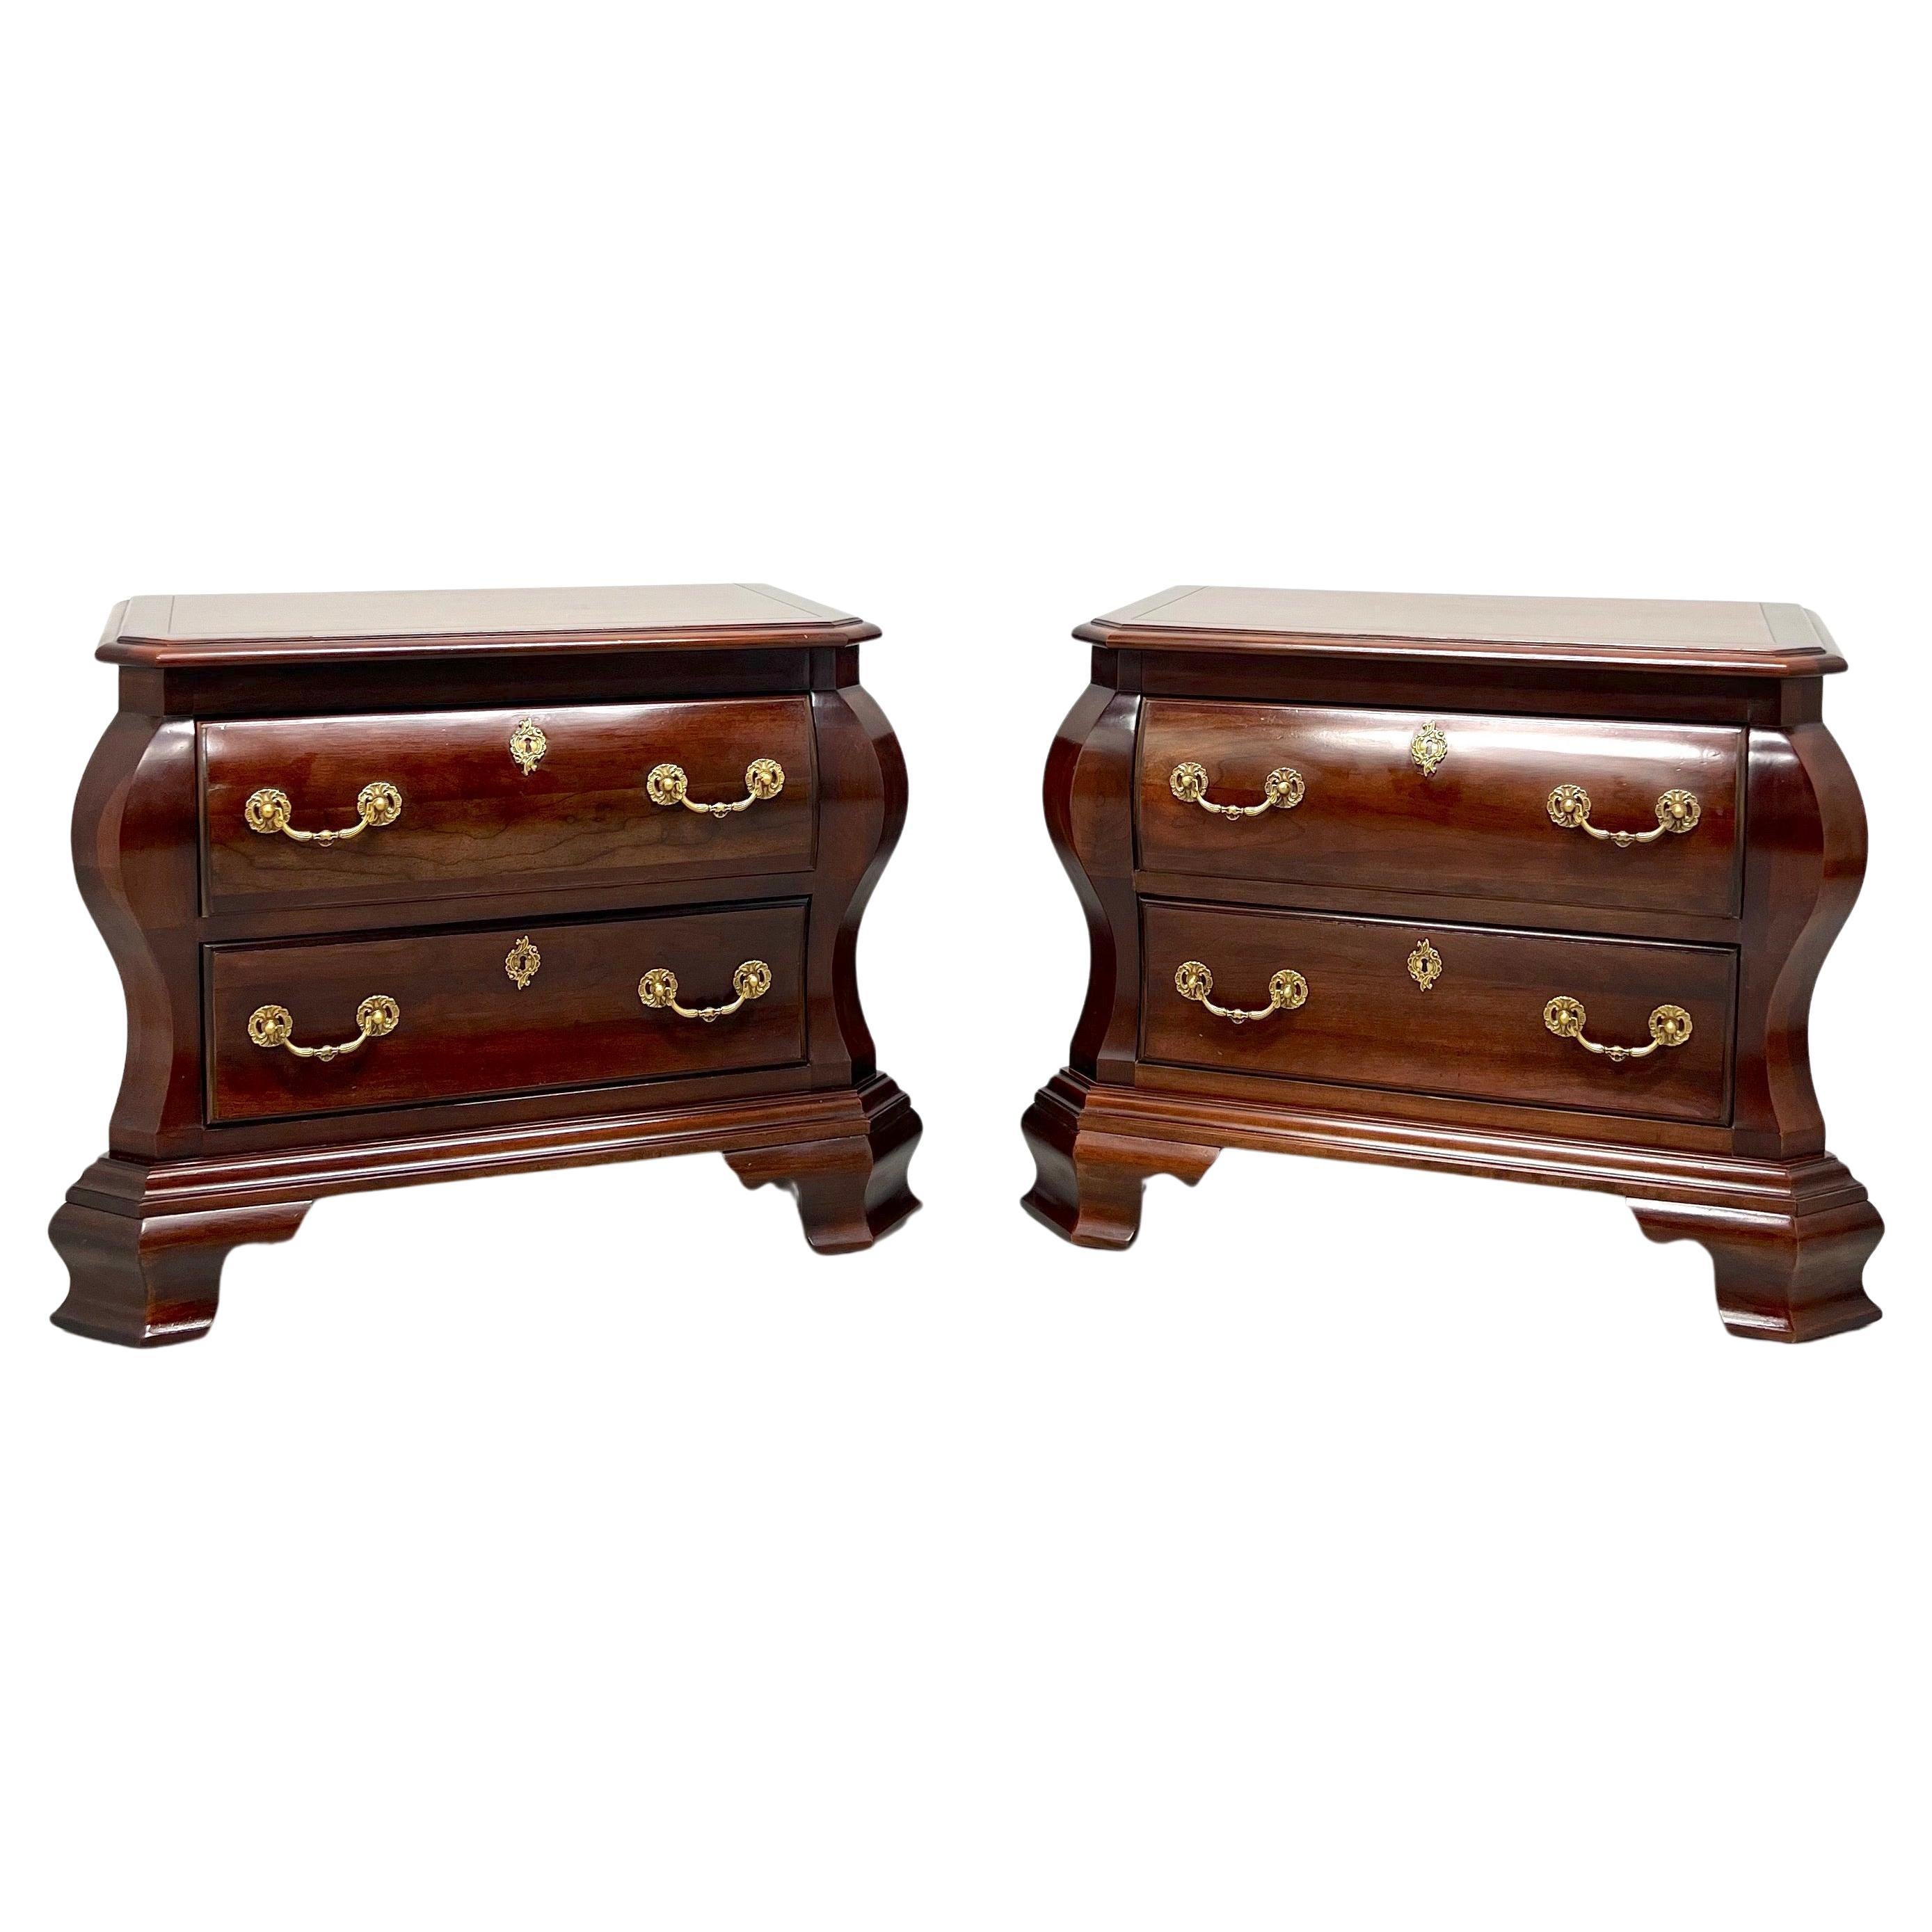 CENTURY Cardella Collection Cherry Italian Bombe Two-Drawer Nightstands - Pair For Sale